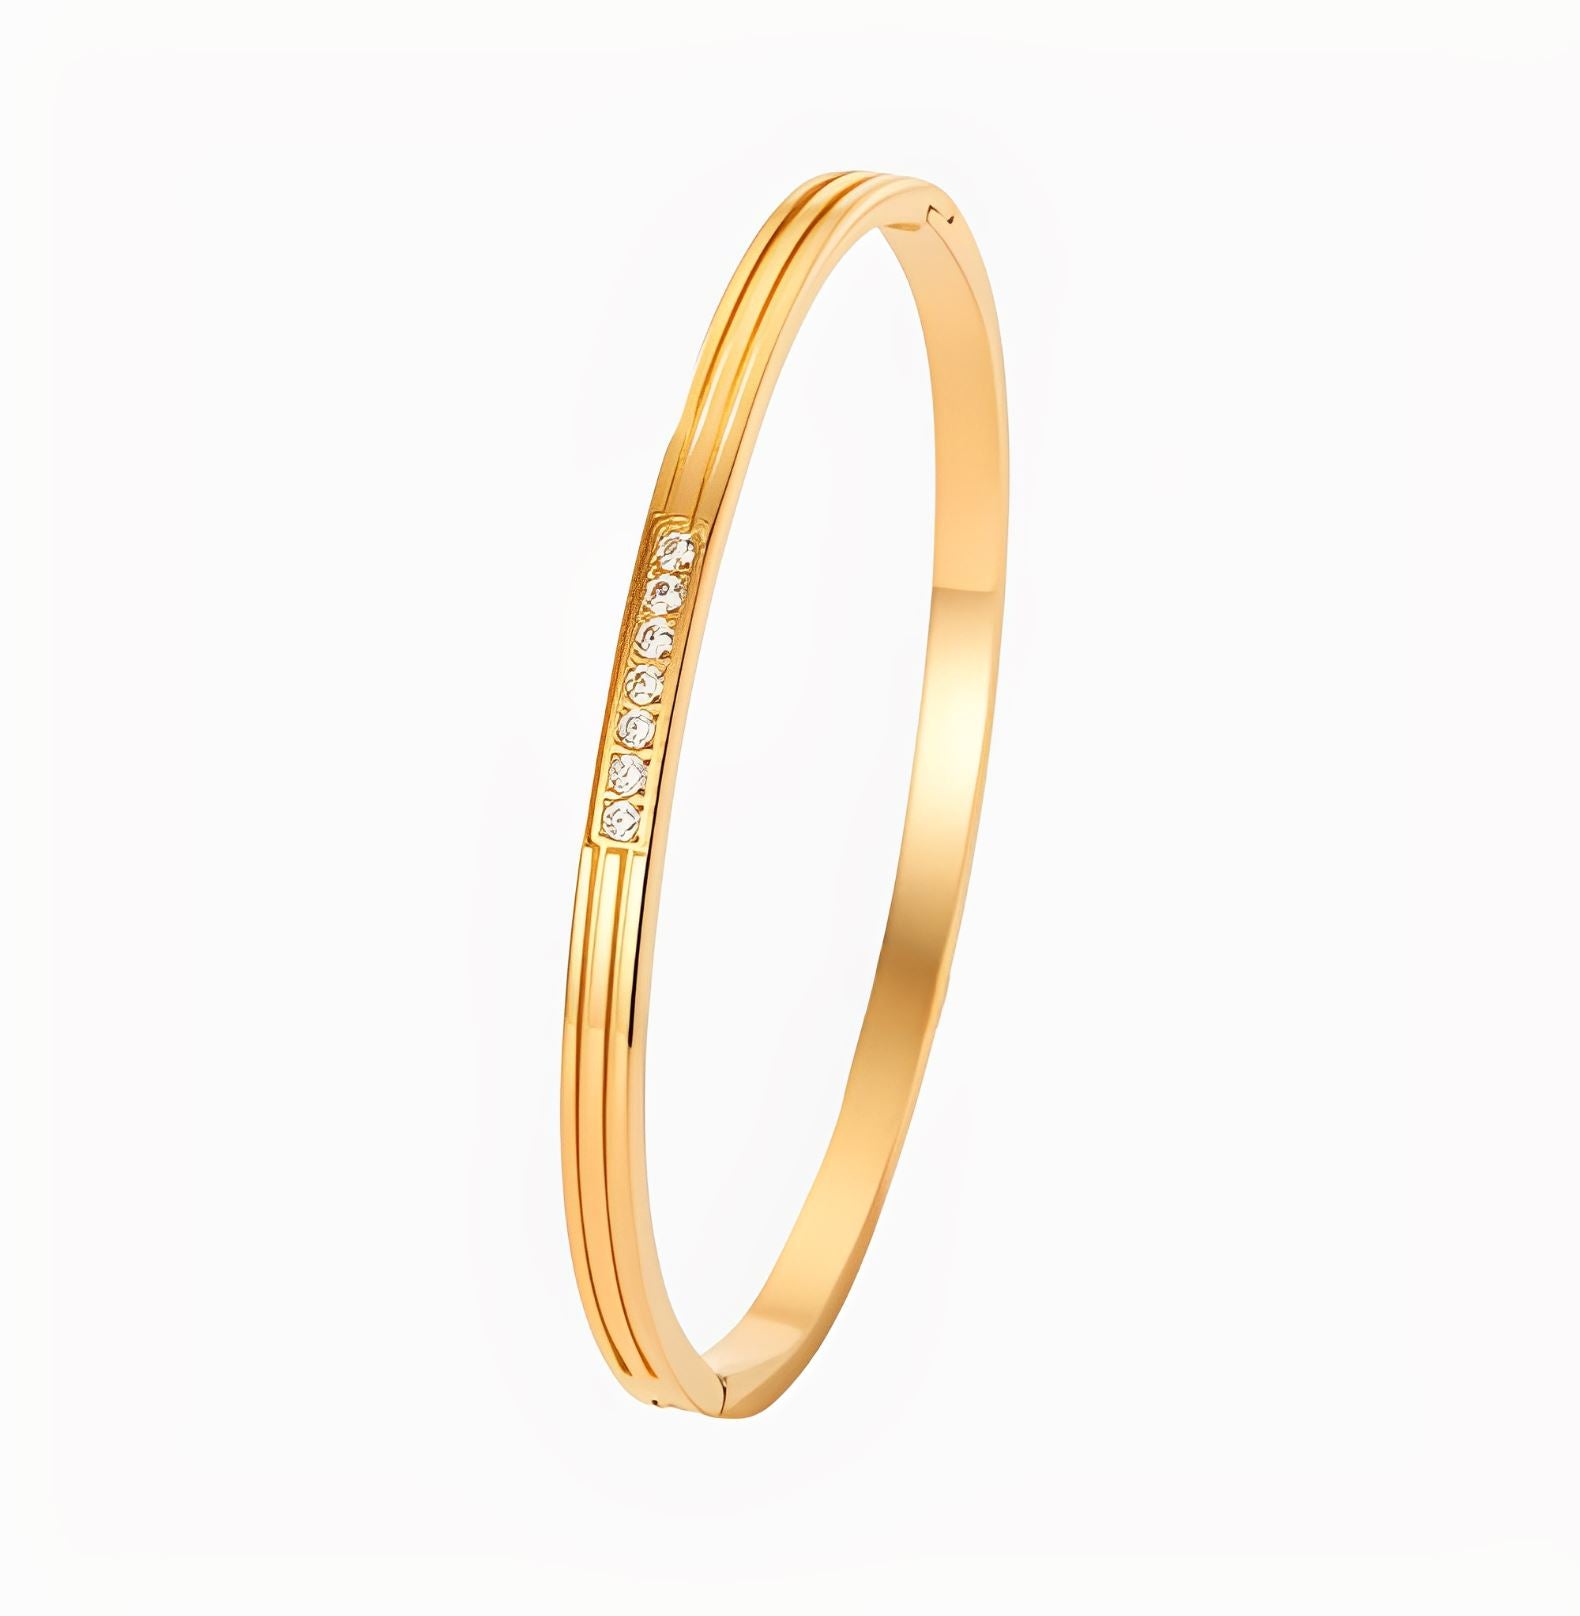 CLEO BANGLE BRACELET braclet Yubama Jewelry Online Store - The Elegant Designs of Gold and Silver ! 